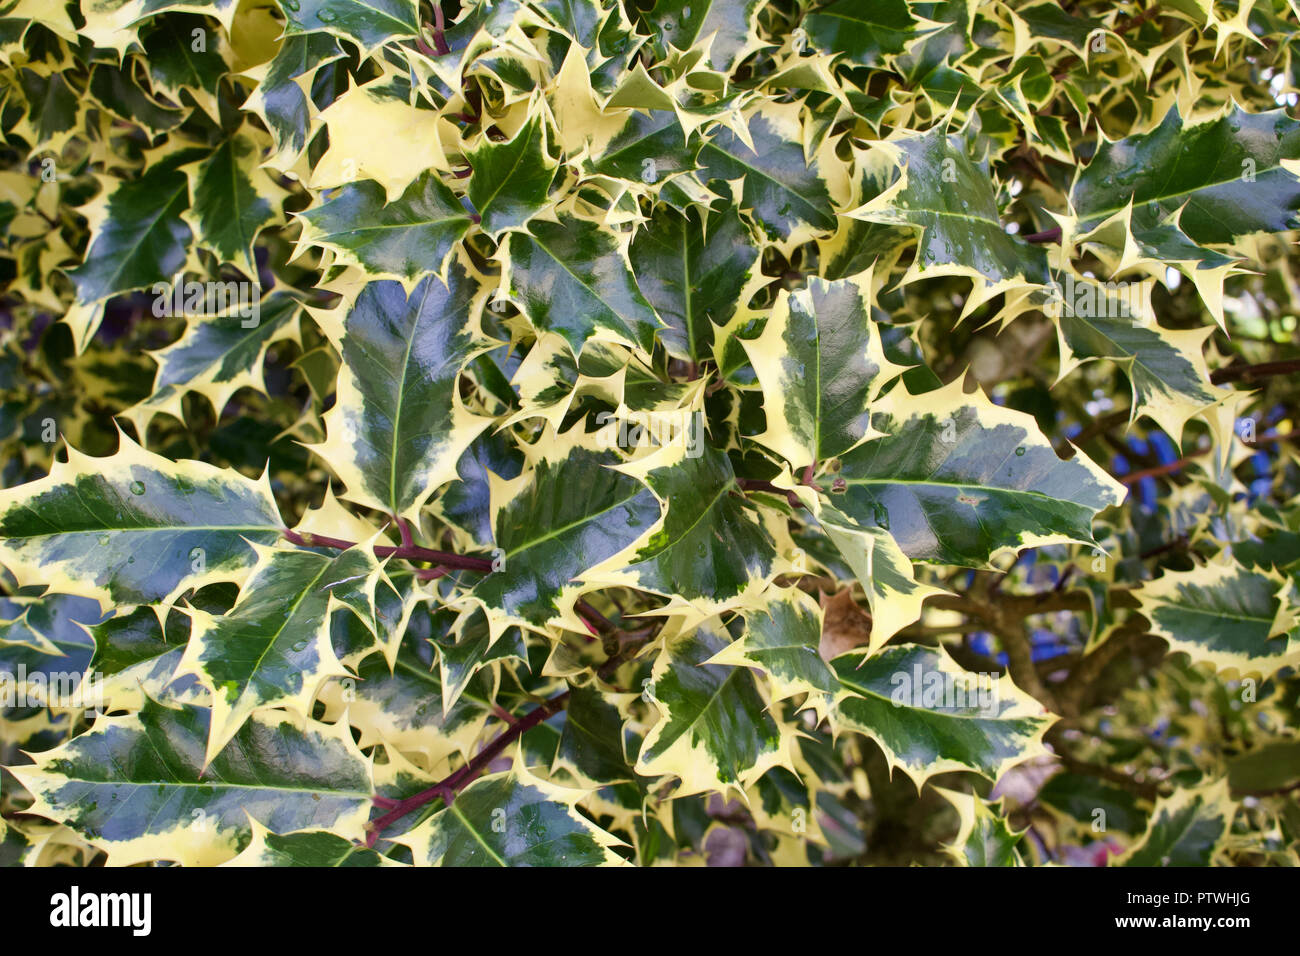 Close up background view of variegated holly plant leaves in full sun Stock Photo